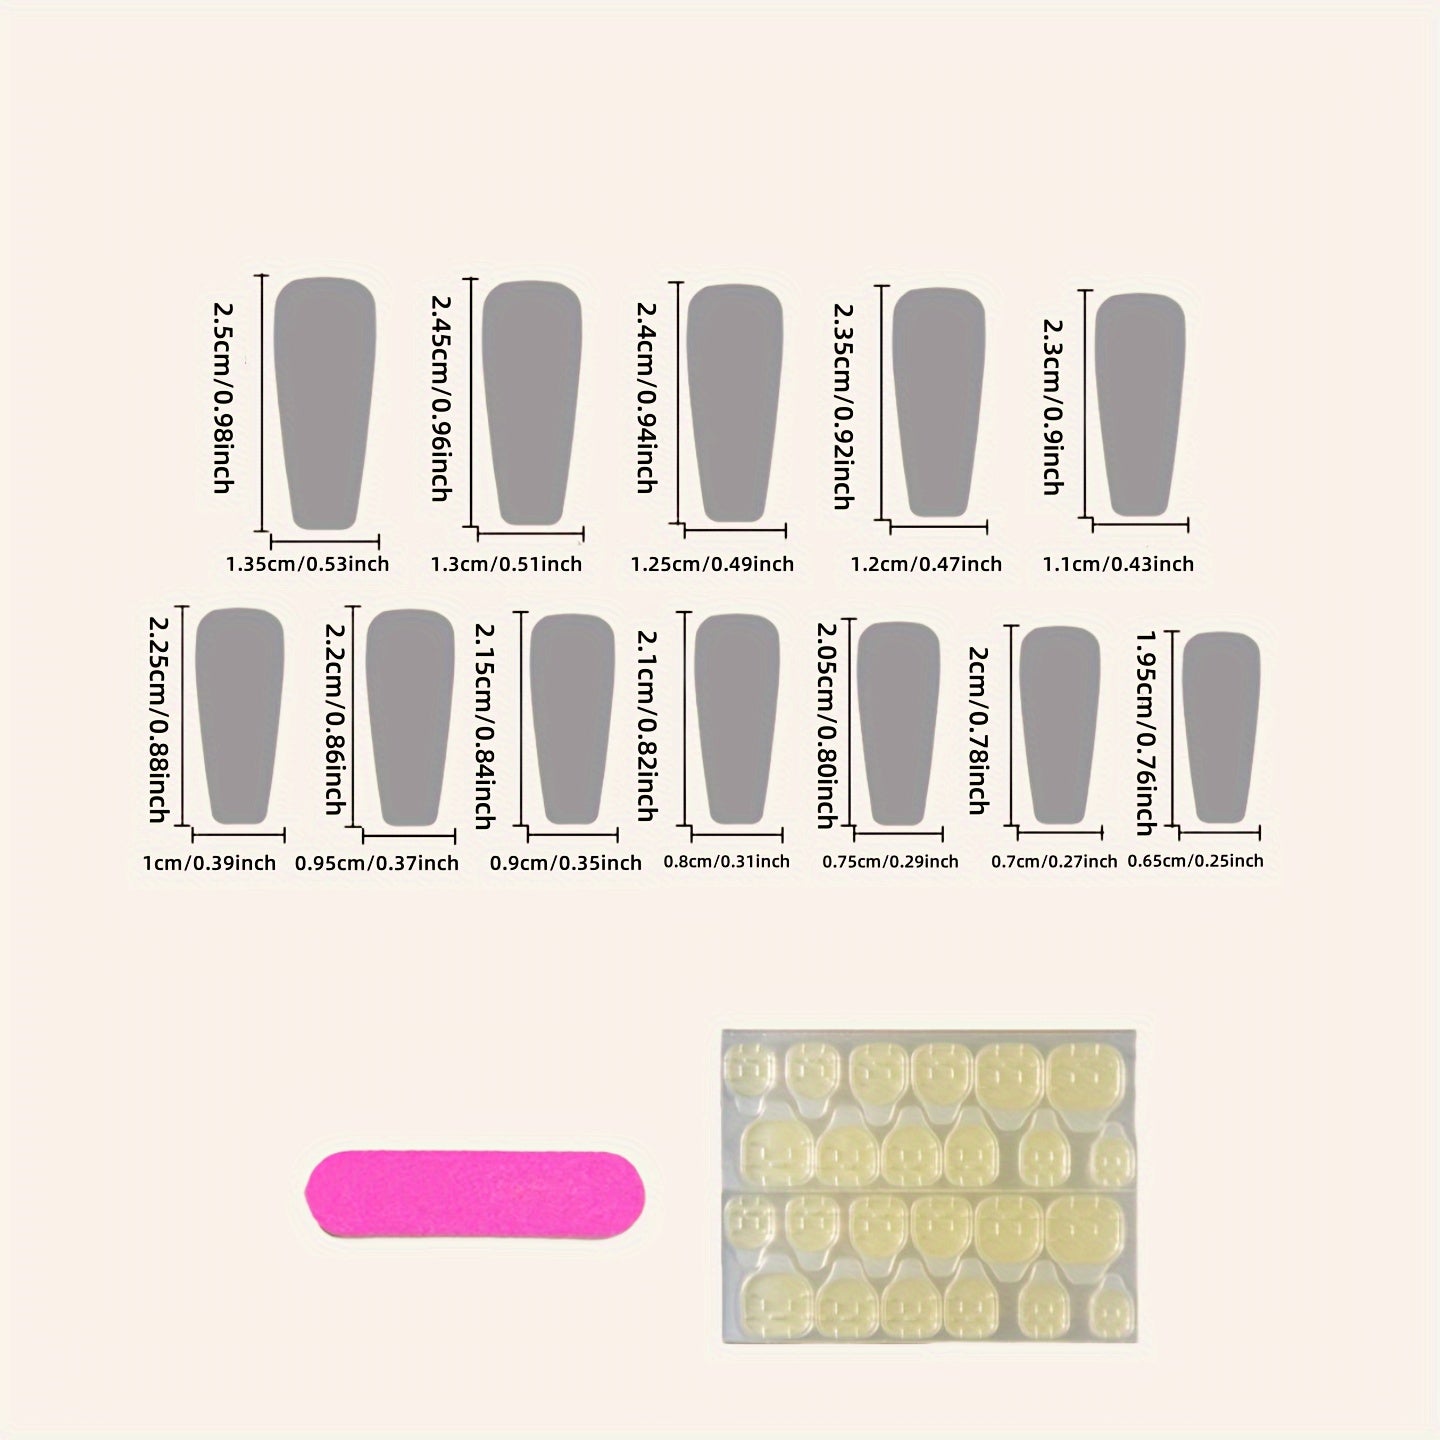 24pcs Dark Blue Butterfly Bliss - Medium Pink Glossy Press On Nails with Butterfly & Polka Dot Design - Full Cover Square Fake Nails for Women & Girls